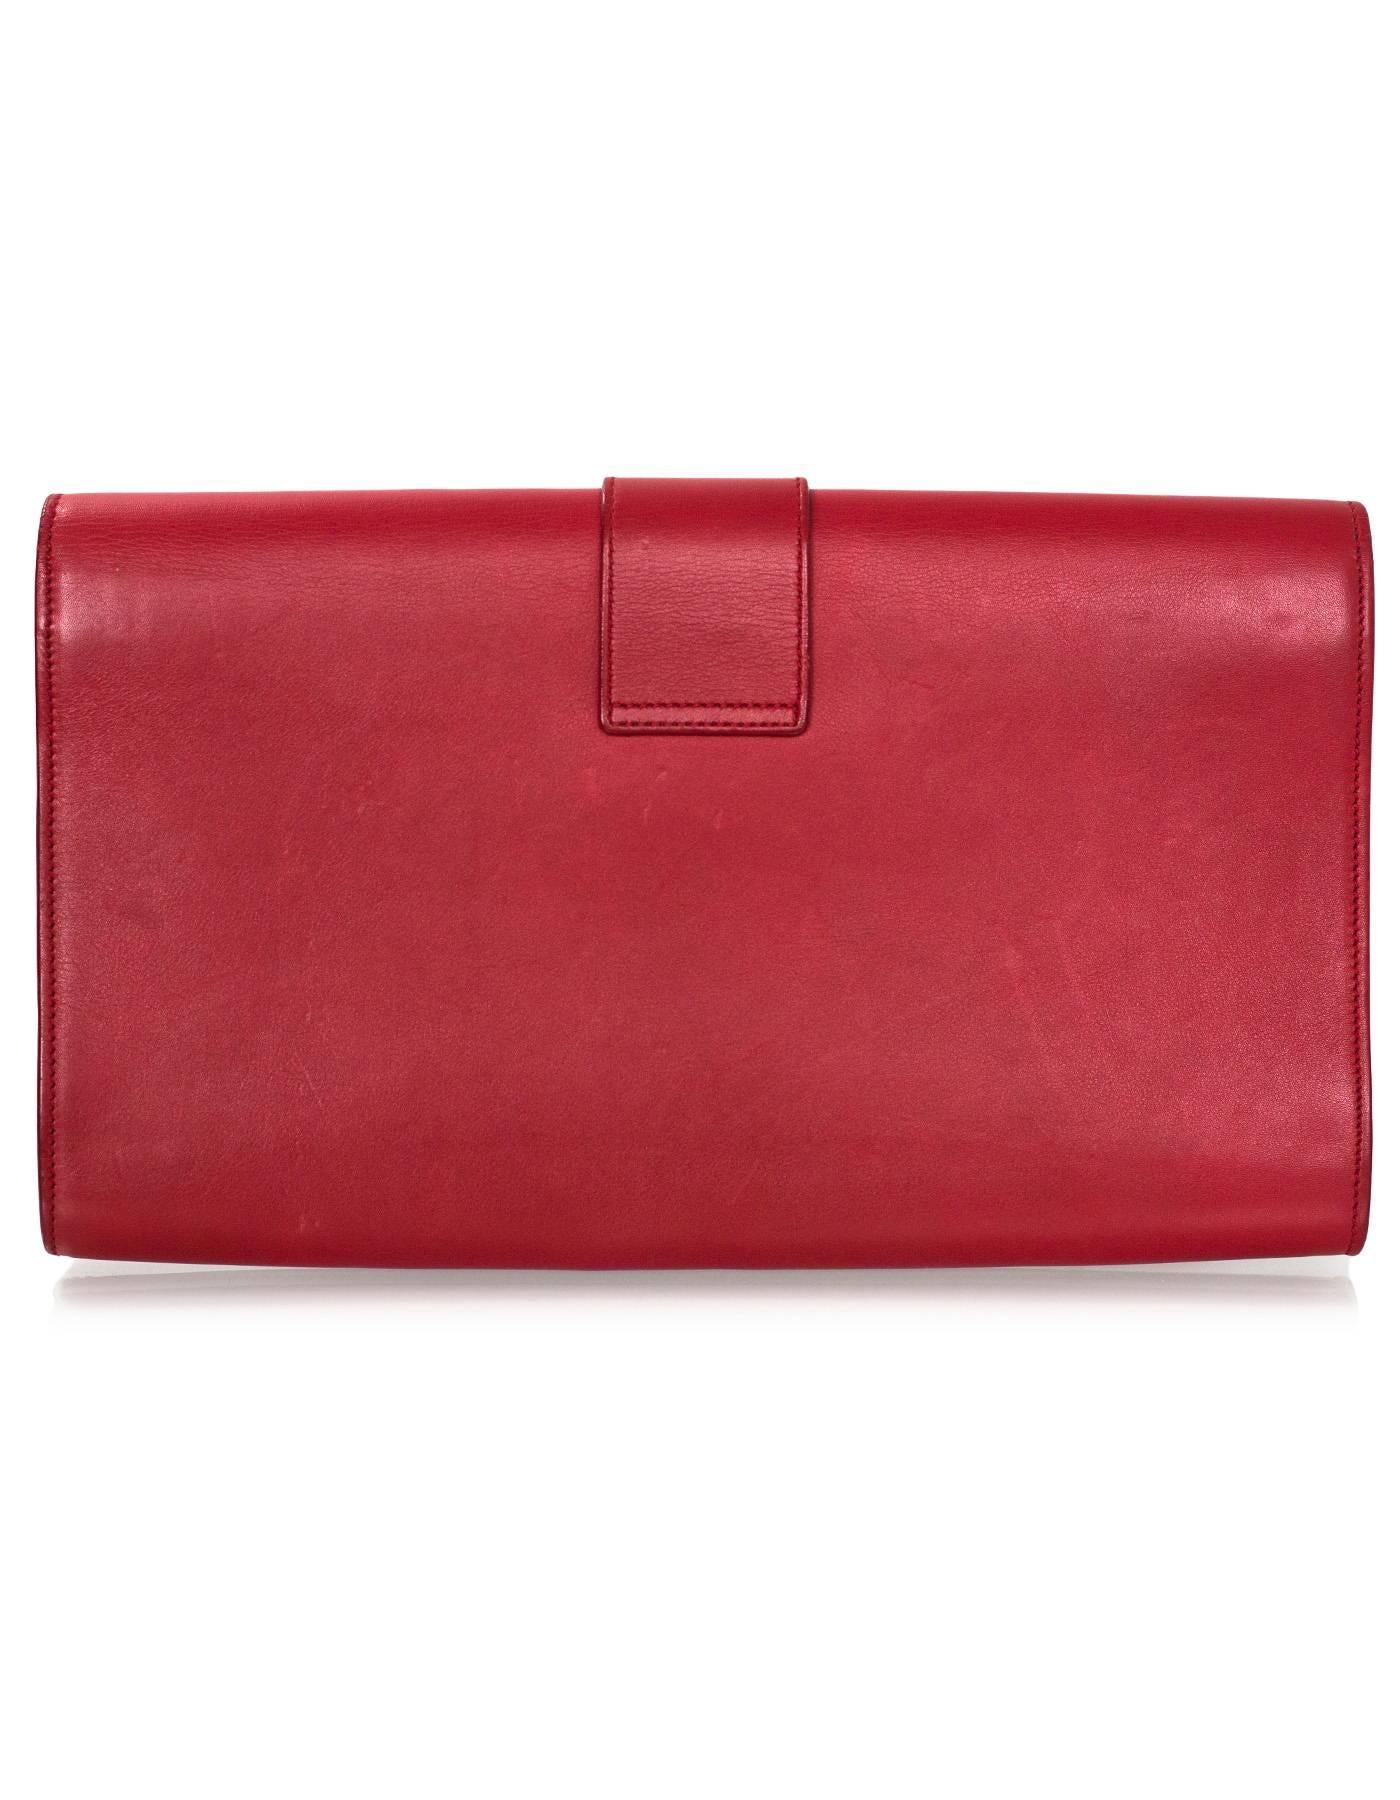 Saint Laurent Red Leather Cabas ChYc Clutch Bag In Excellent Condition In New York, NY